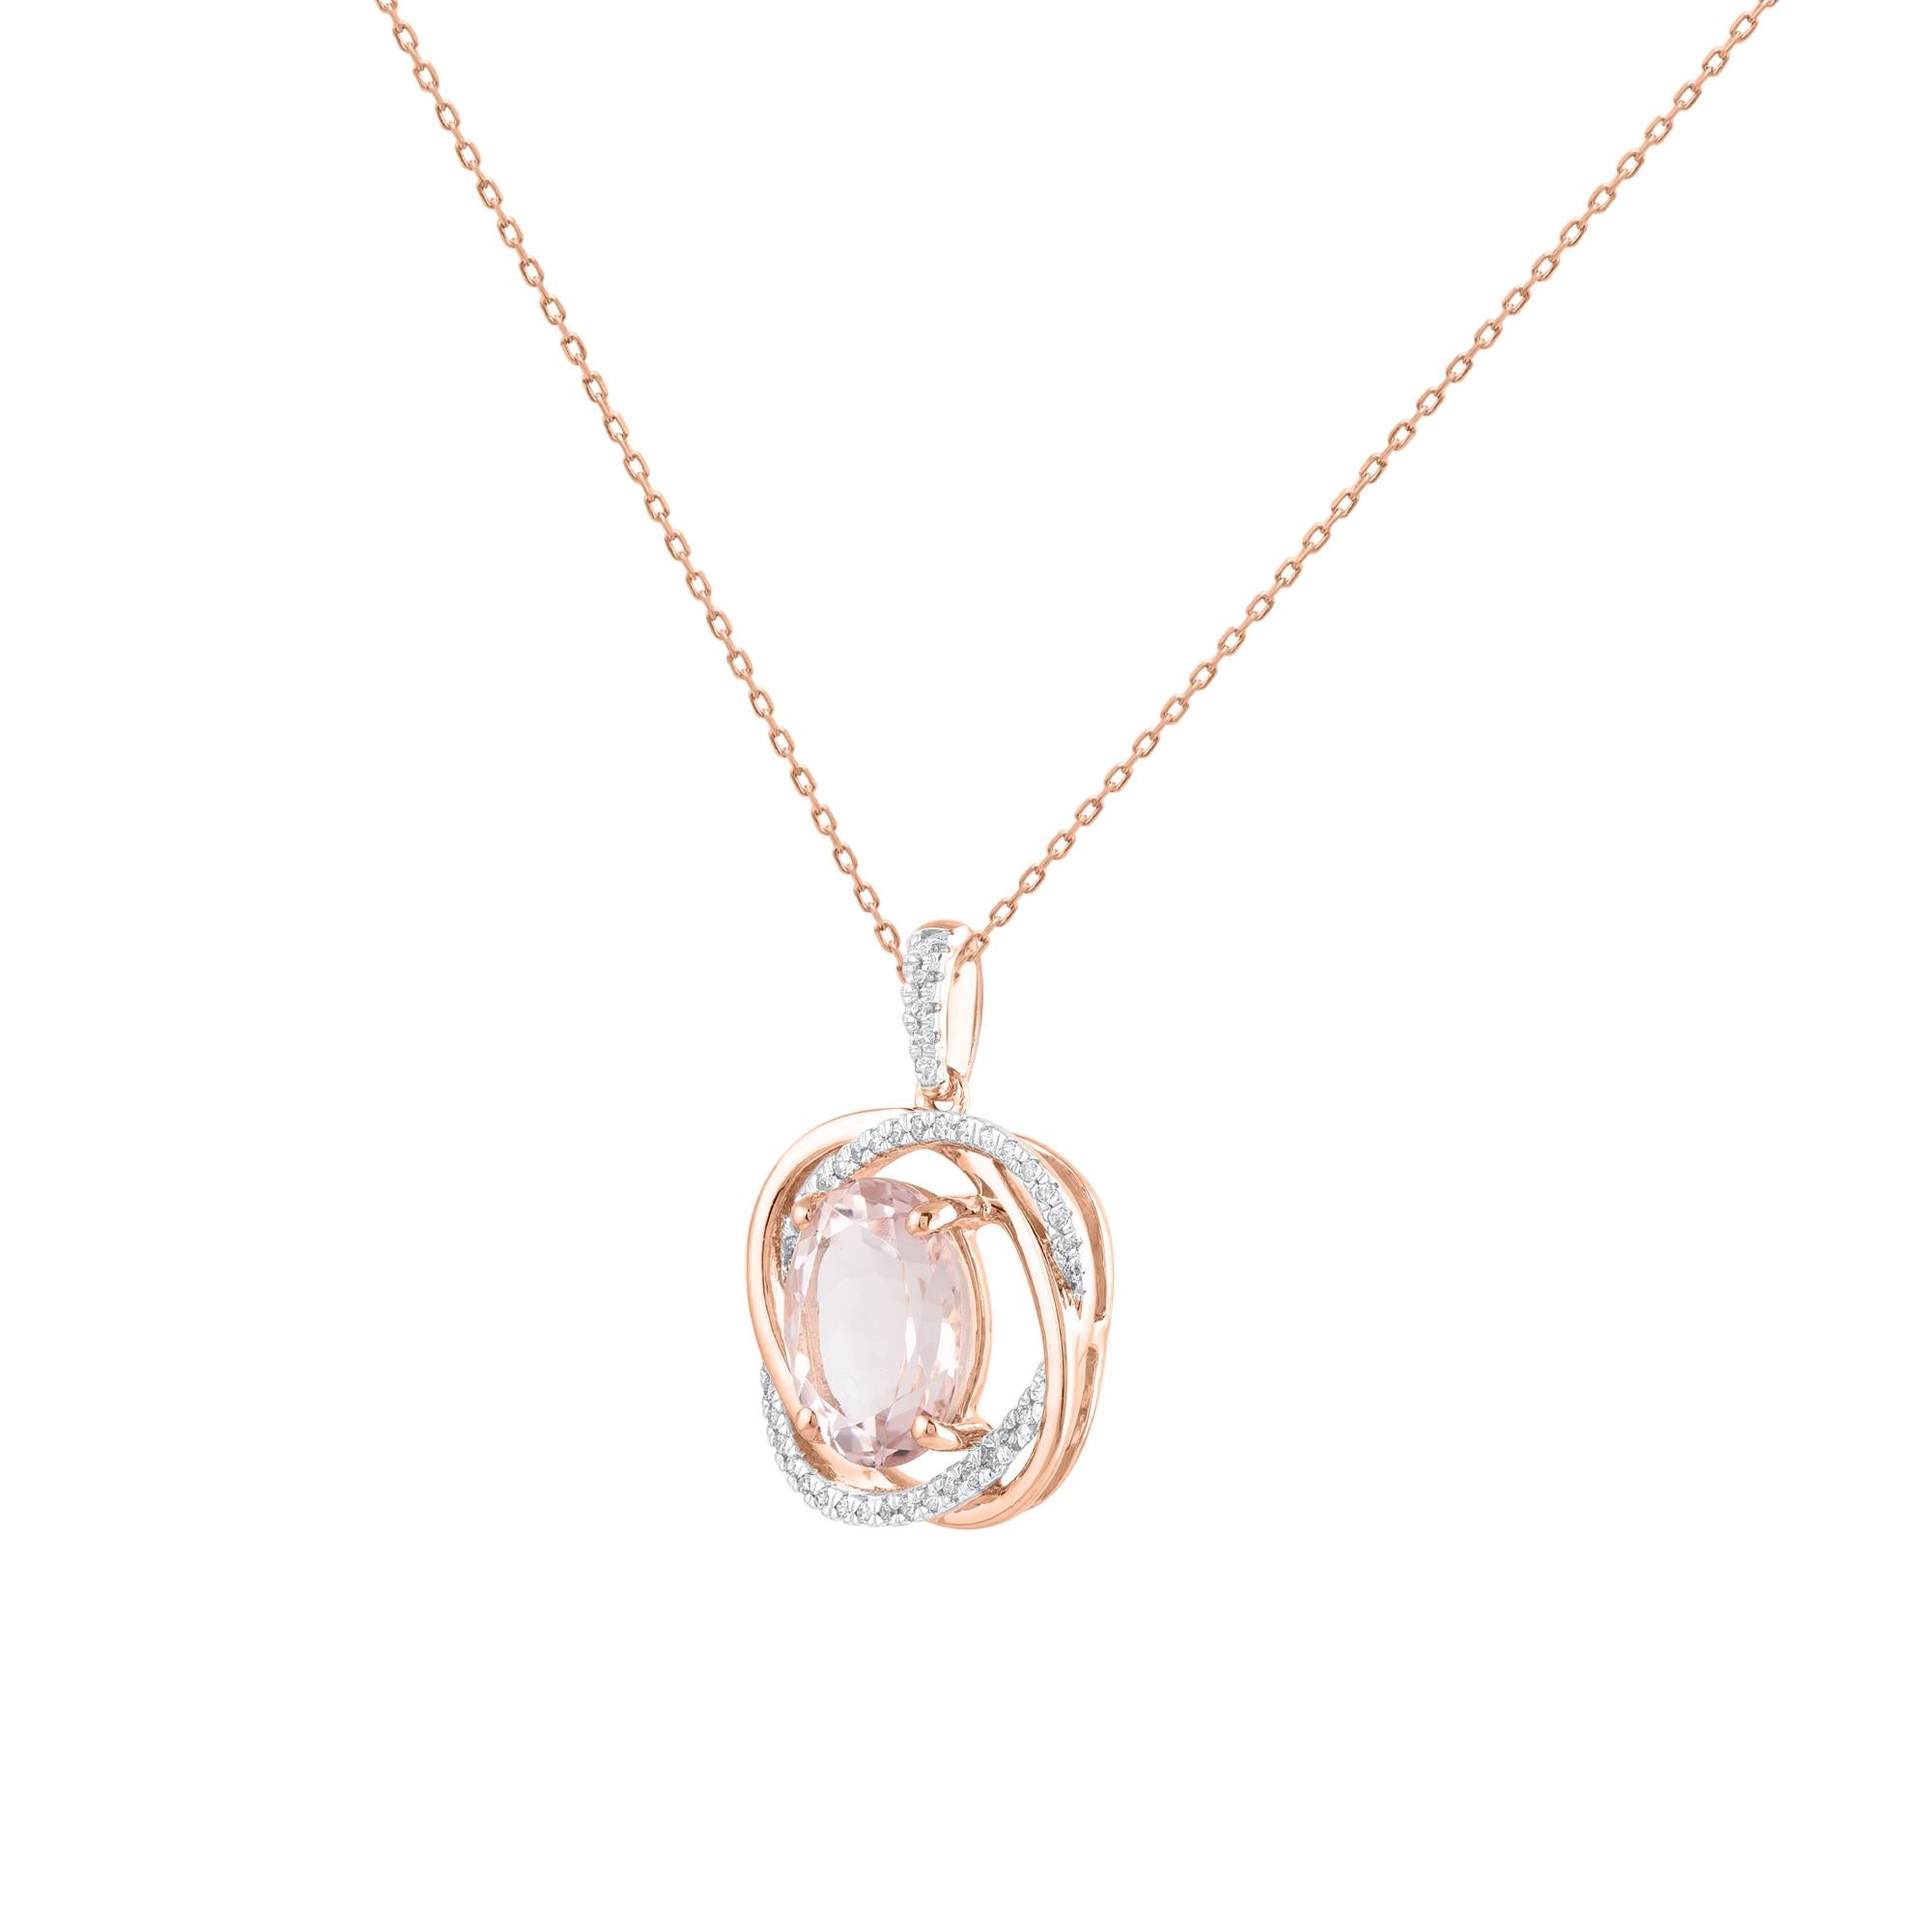 Make a bold statement of style and beliefs with the eye-catching elegance of this morganite gemstone pendant.  Beautifully crafted by our inhouse experts in 18 karat white gold and embellished with 41 round diamond and 1 morganite in set in prong